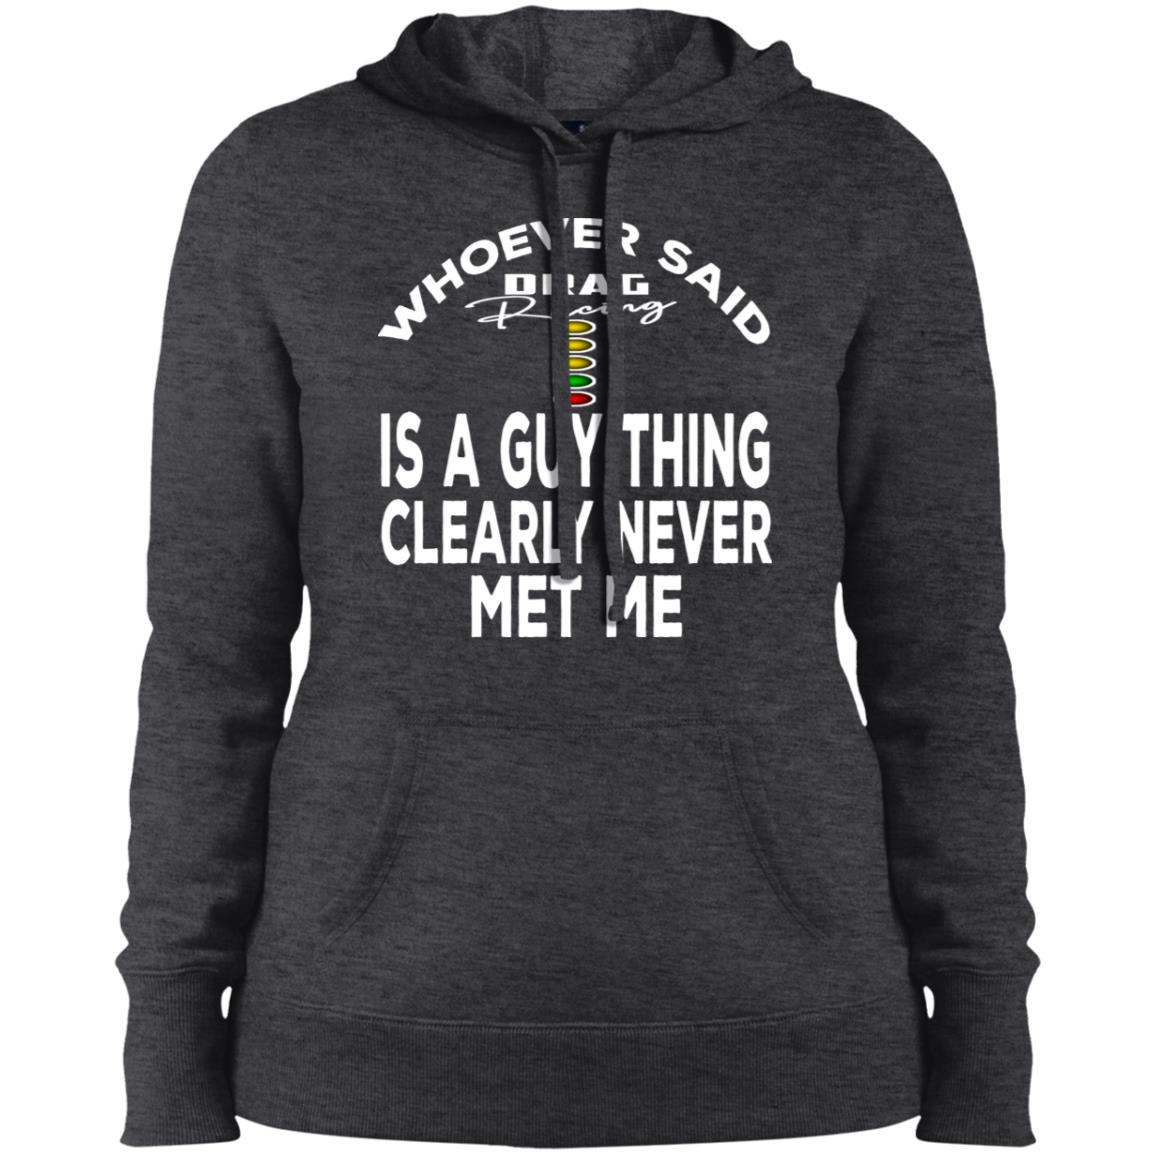 Whoever said drag racing is guy thing clearly never met me T-shirts